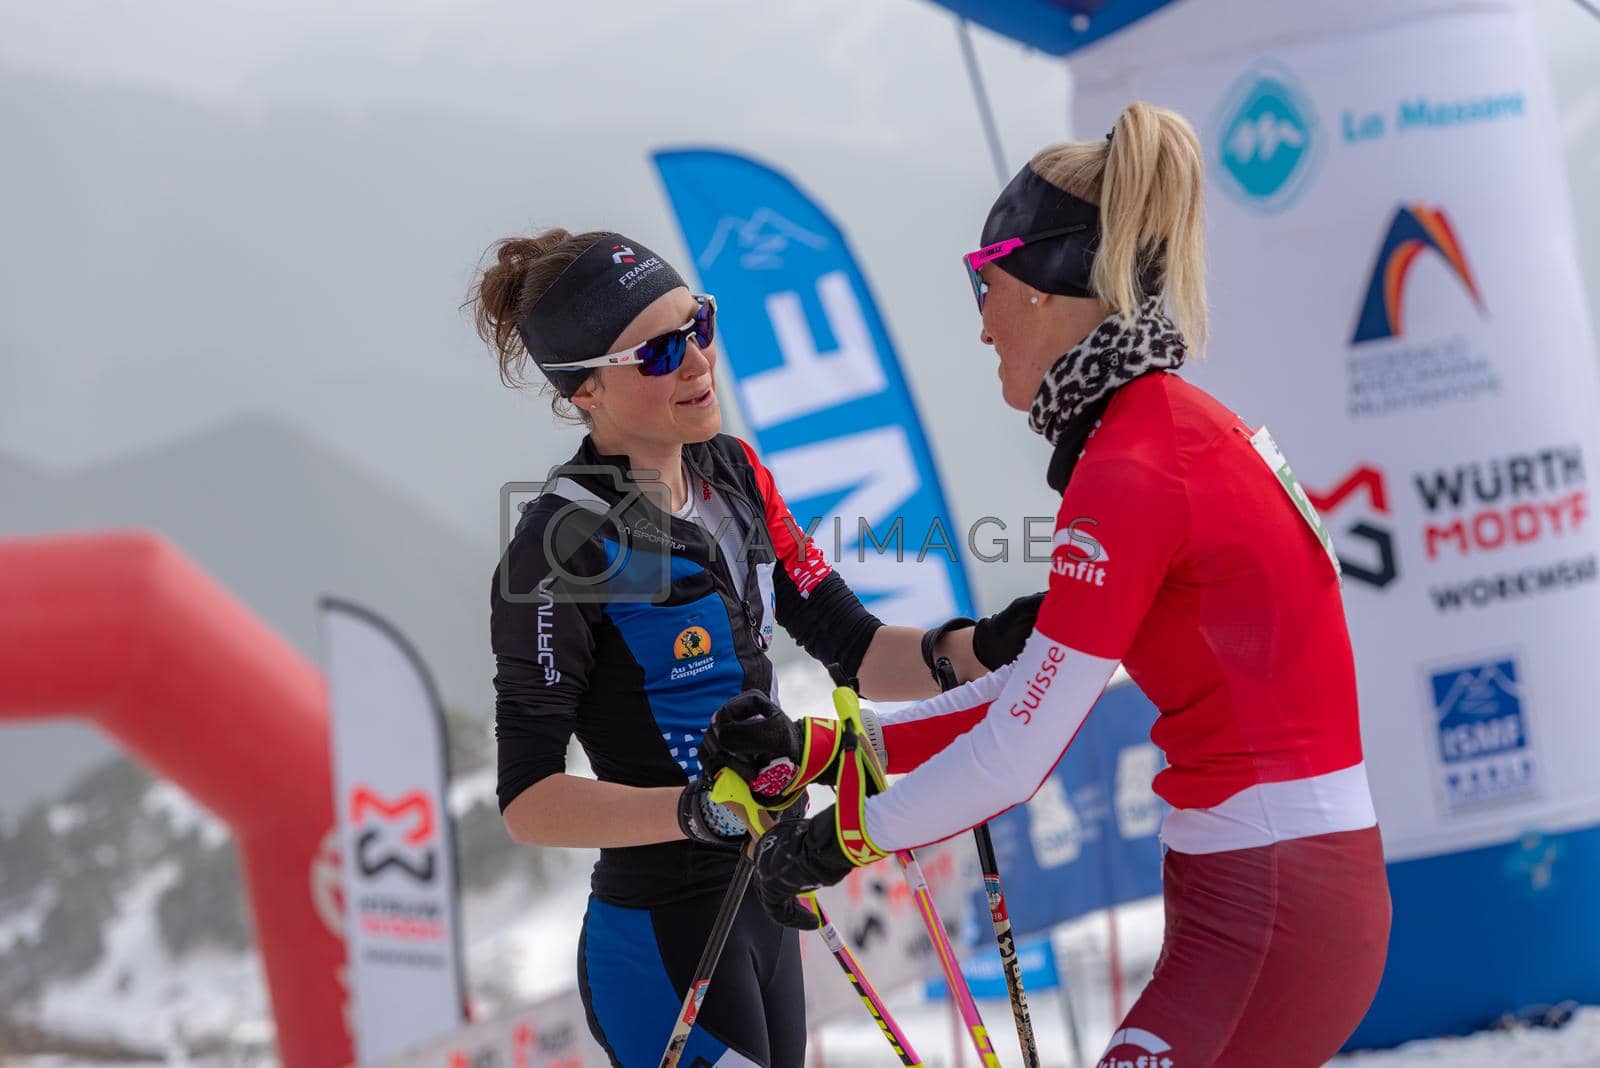 Royalty free image of KREUZER Victoria SUI and GACHET MOLLARET Axelle FRA in the finish line ISMF WC Championships Comapedrosa Andorra 2021 Vertical Race. by martinscphoto